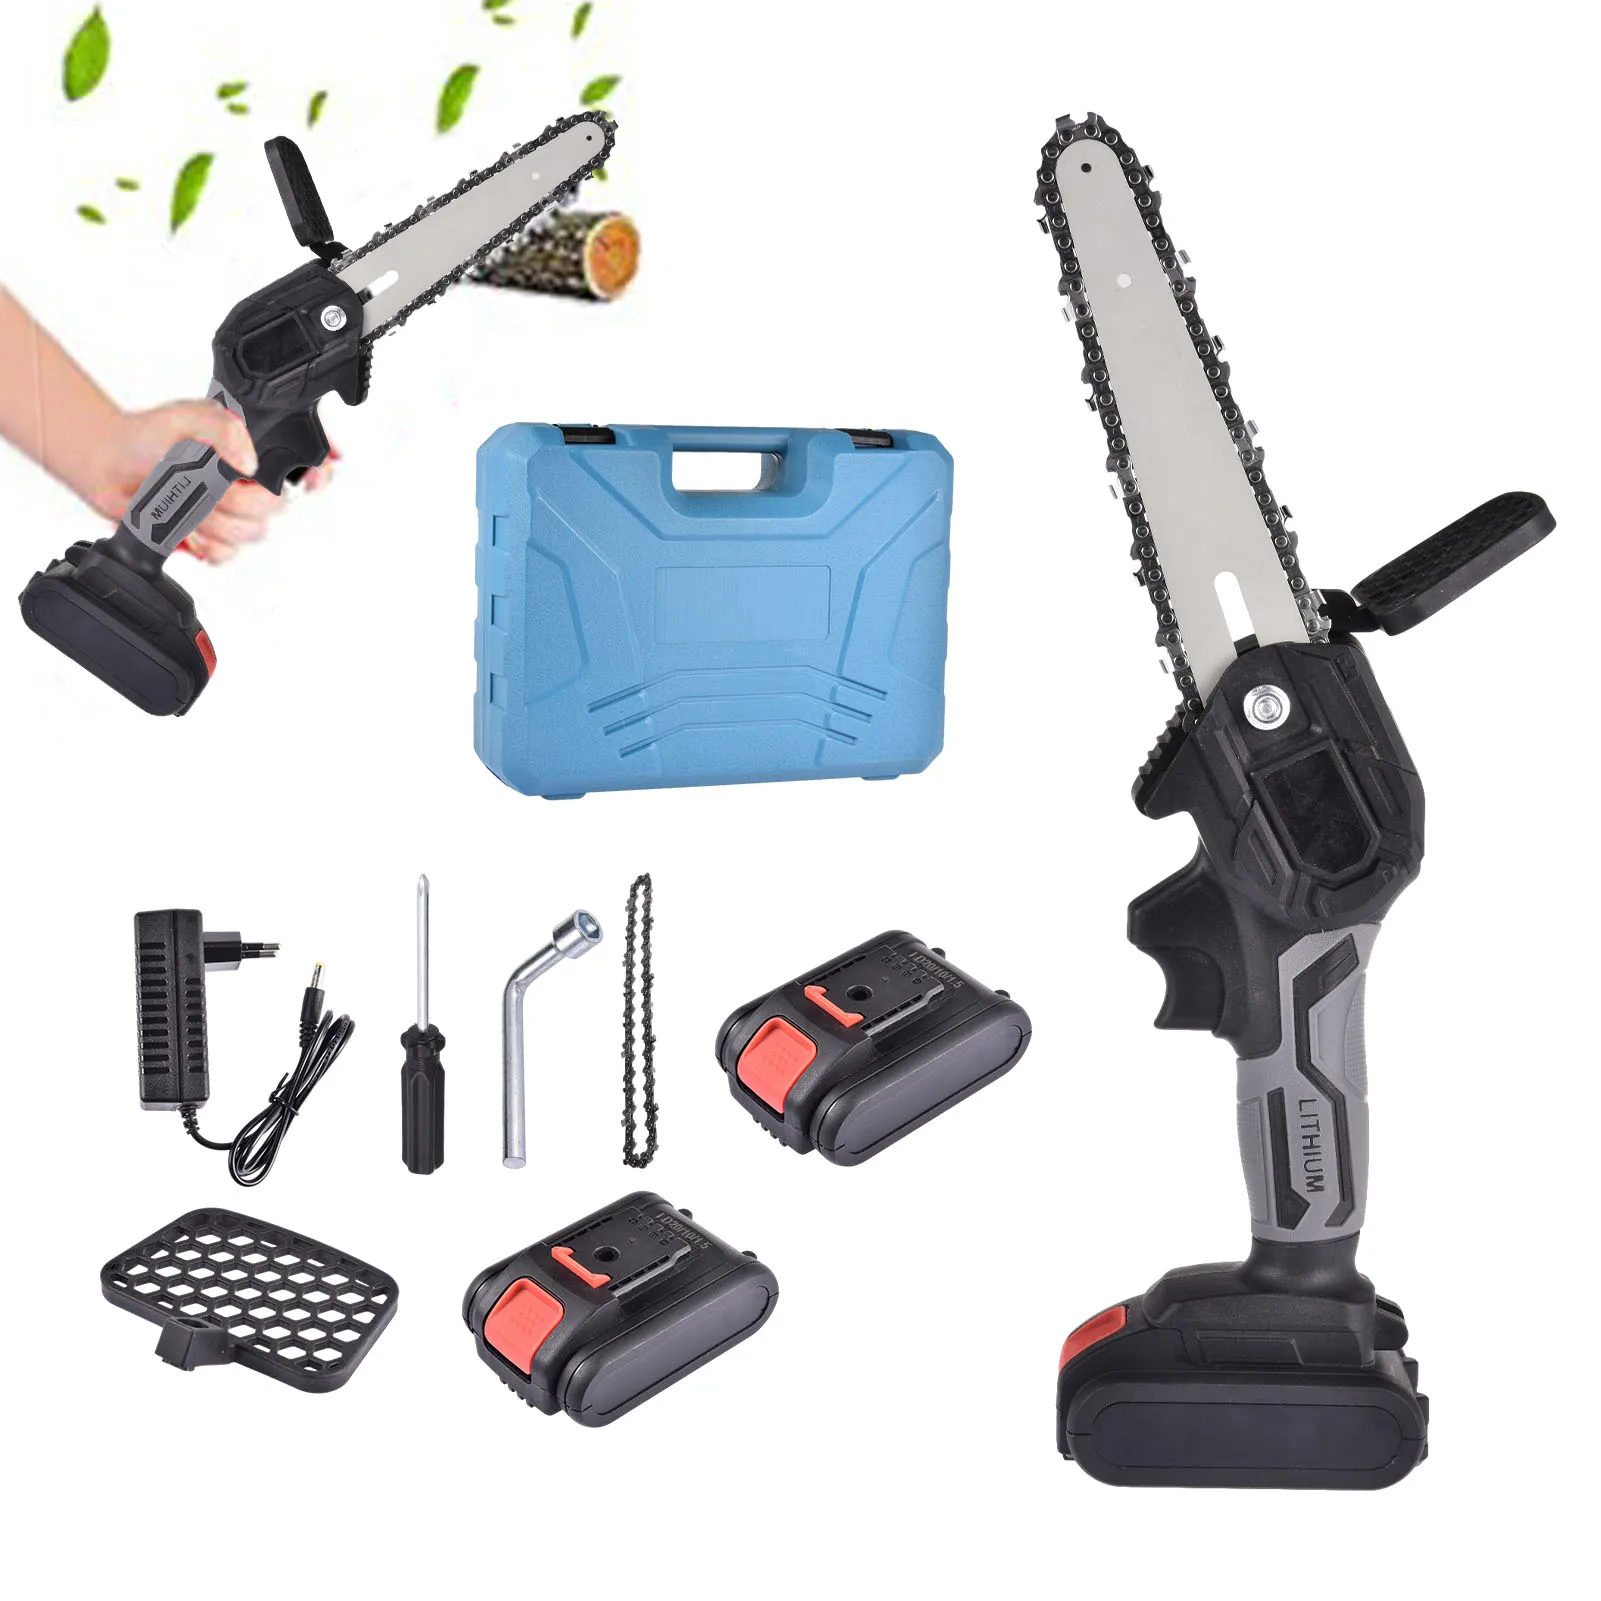 6 Inch Portable Electric Pruning Chainsaw 2 Battery Cordless Saw One-handed Woodworking Chain Saw Garden Logging Power Tool